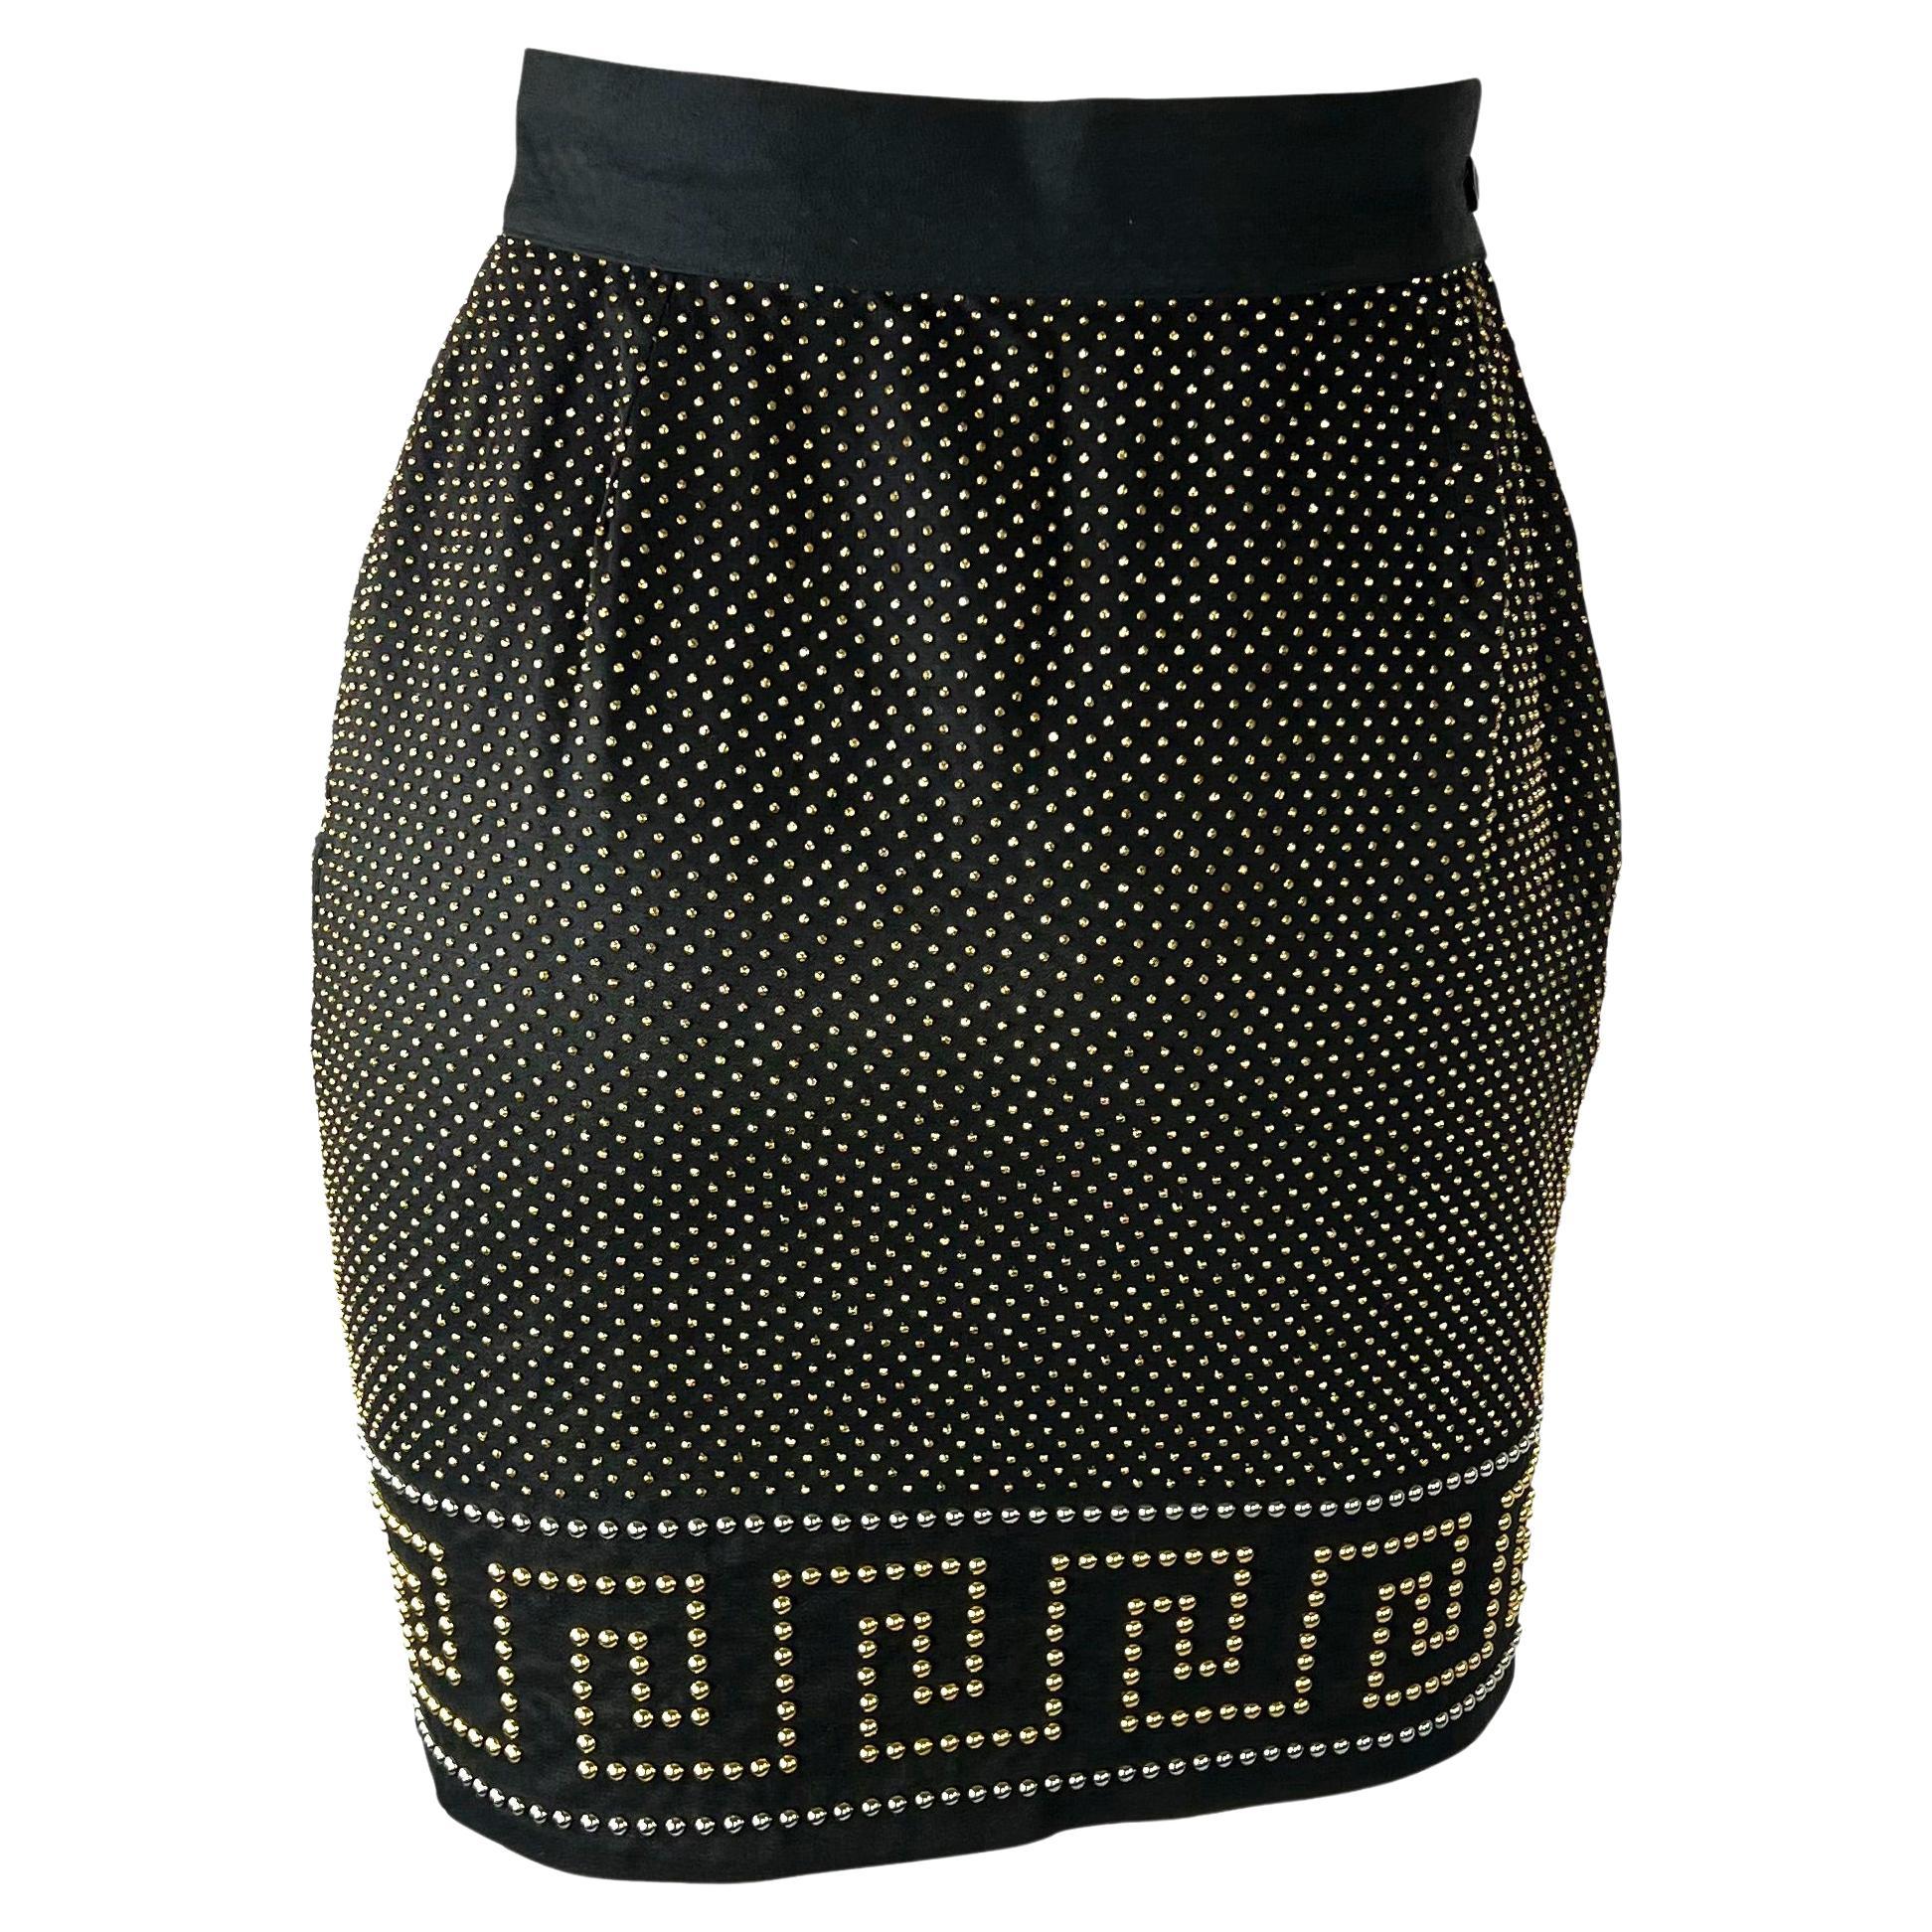 F/W 1992 Gianni Versace Couture 'Miss S&M' Studded Greek Key Skirt For Sale 2